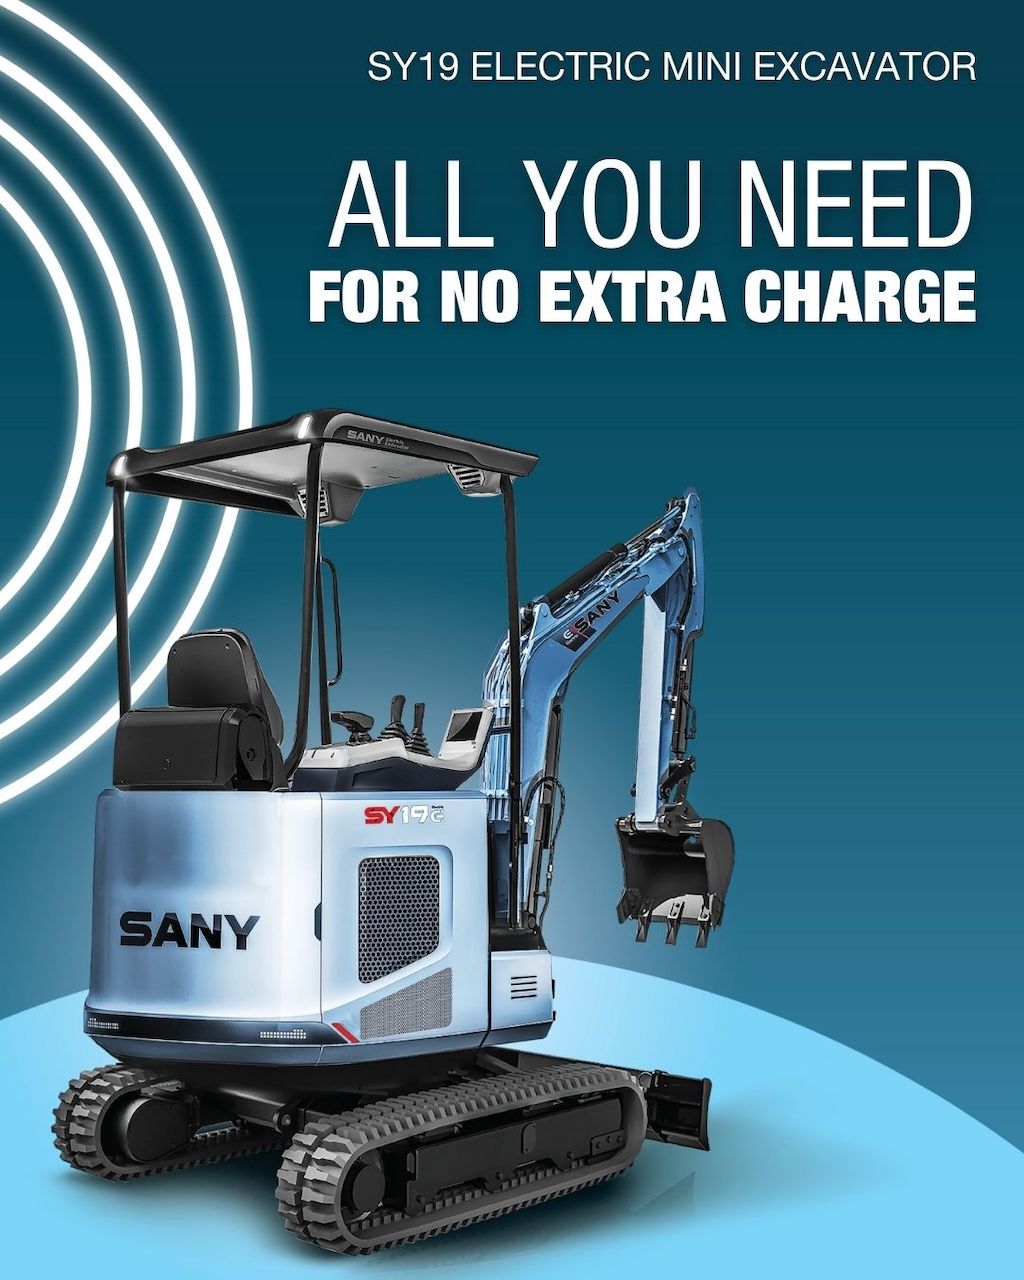 SANY launches new electric mini